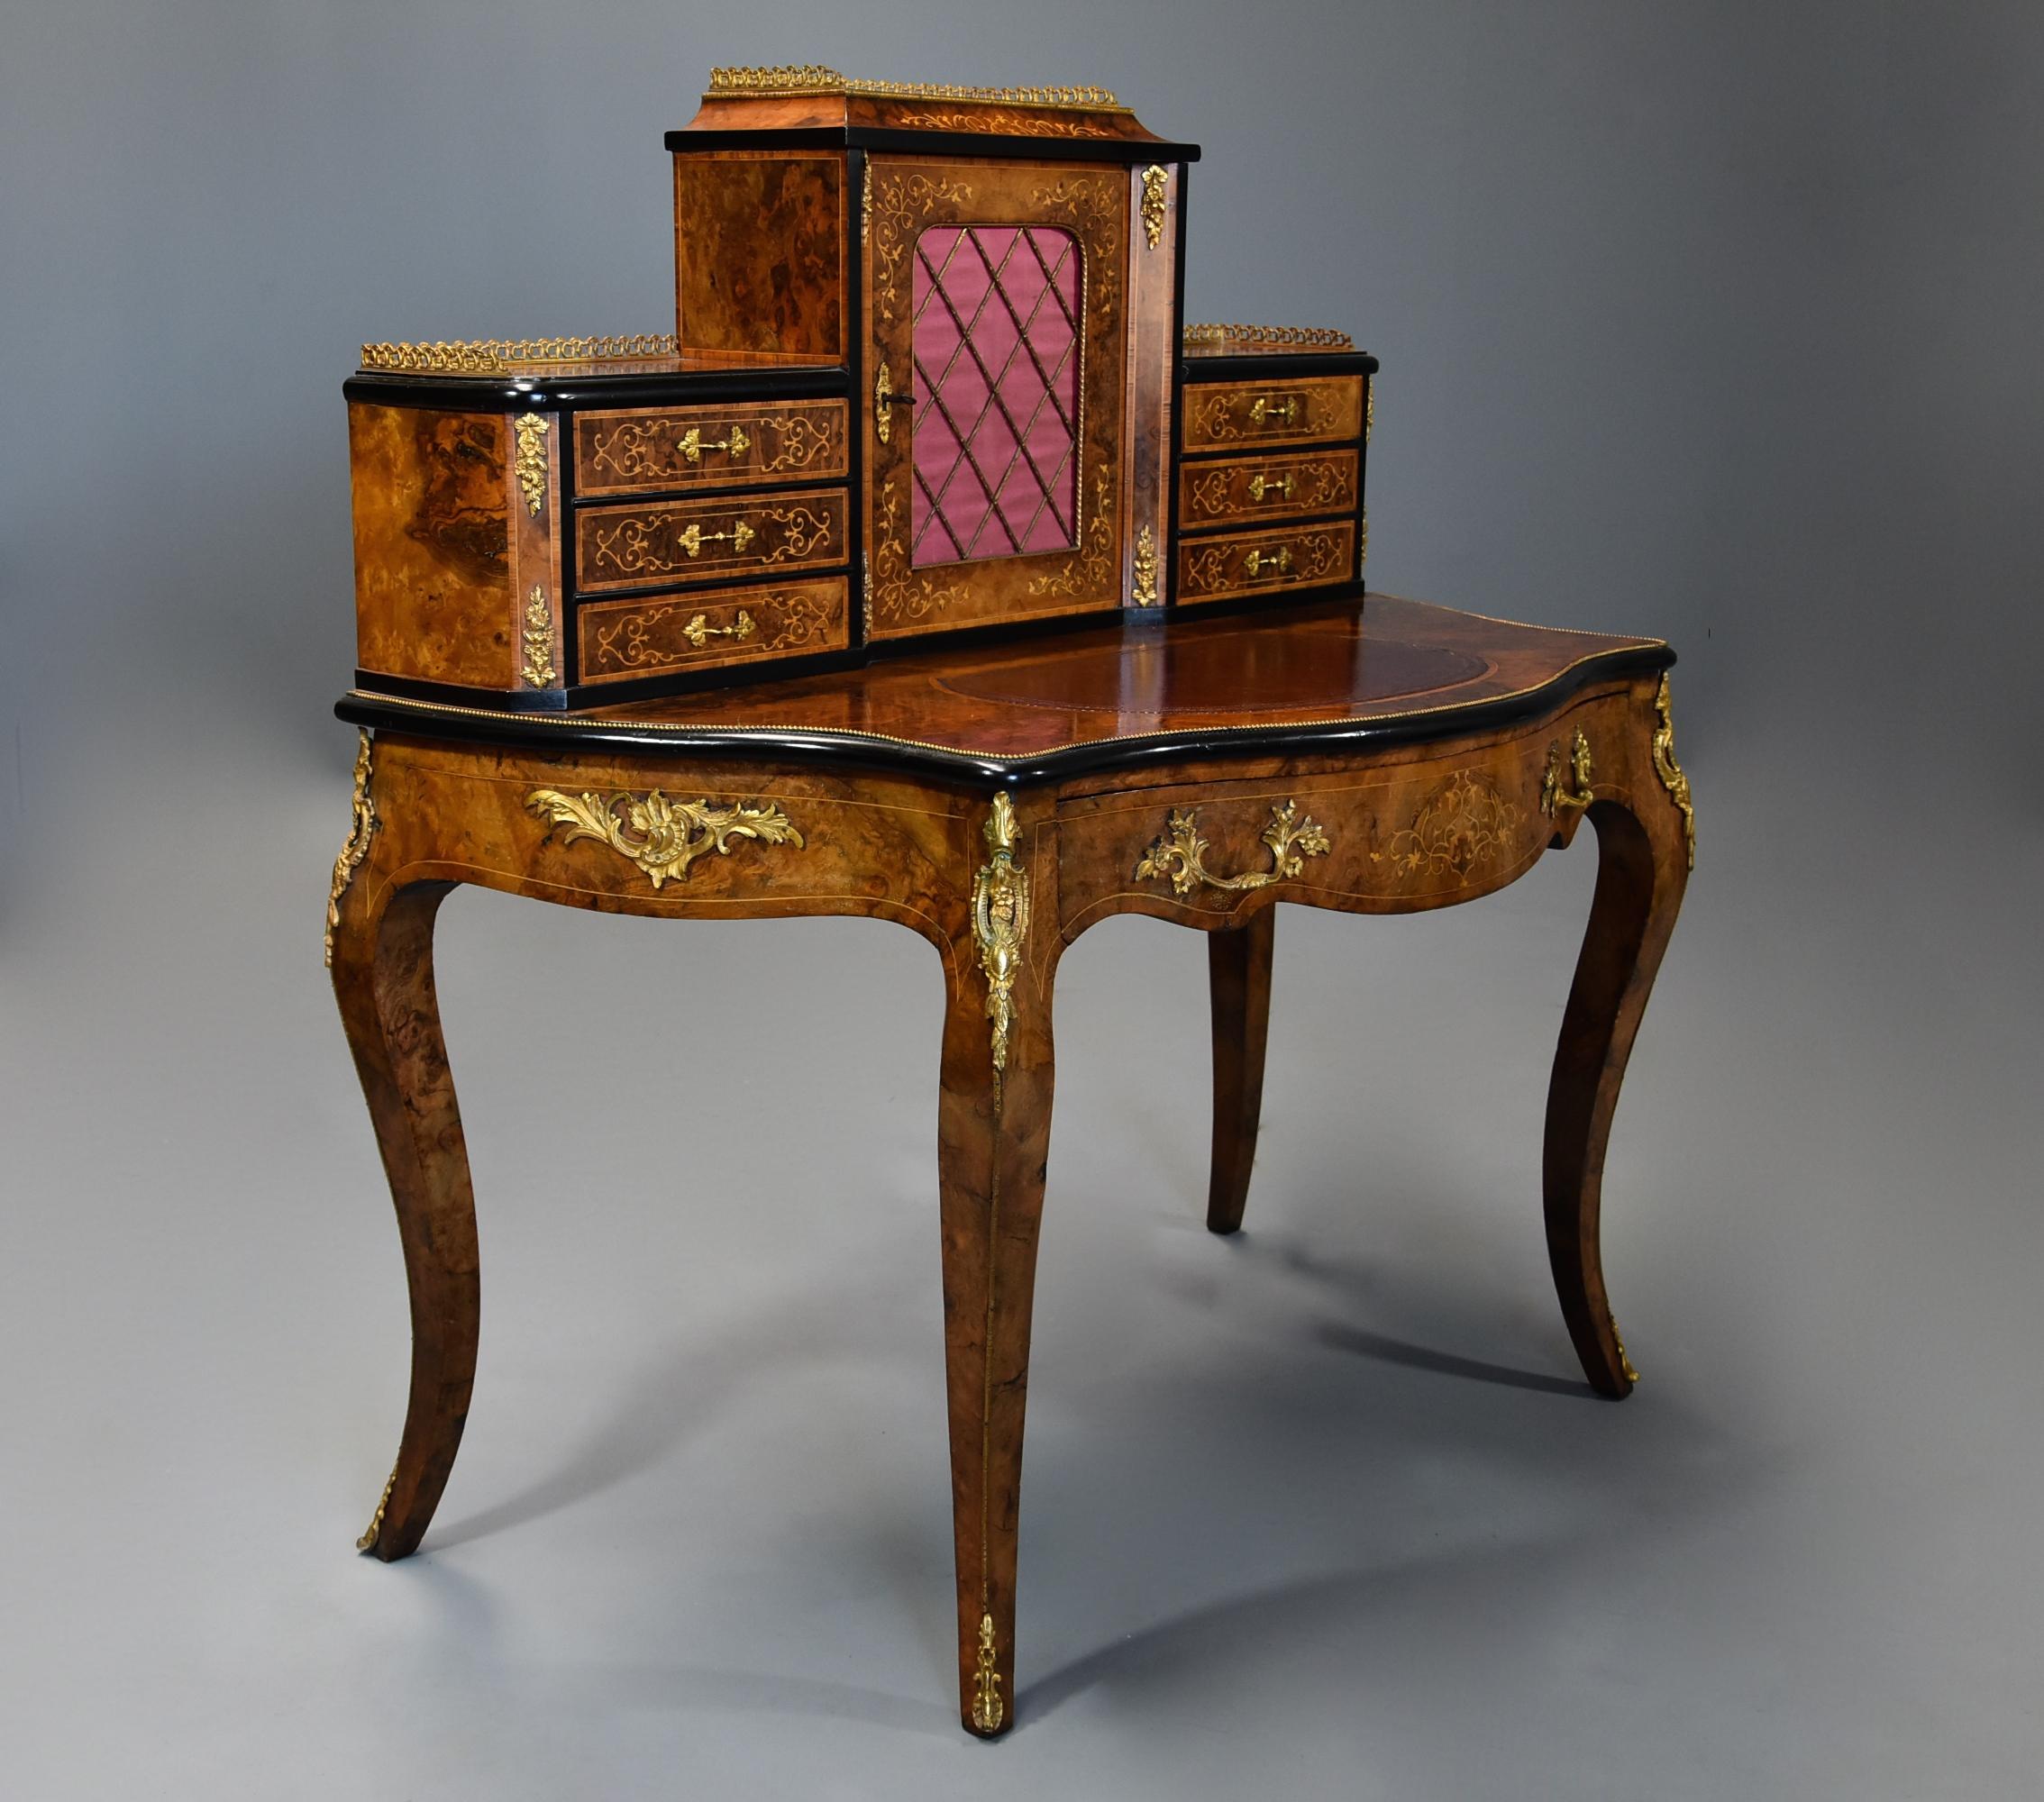 Mid-19th Century Fine Quality Burr Walnut Bonheur de Jour in the French Style For Sale 1